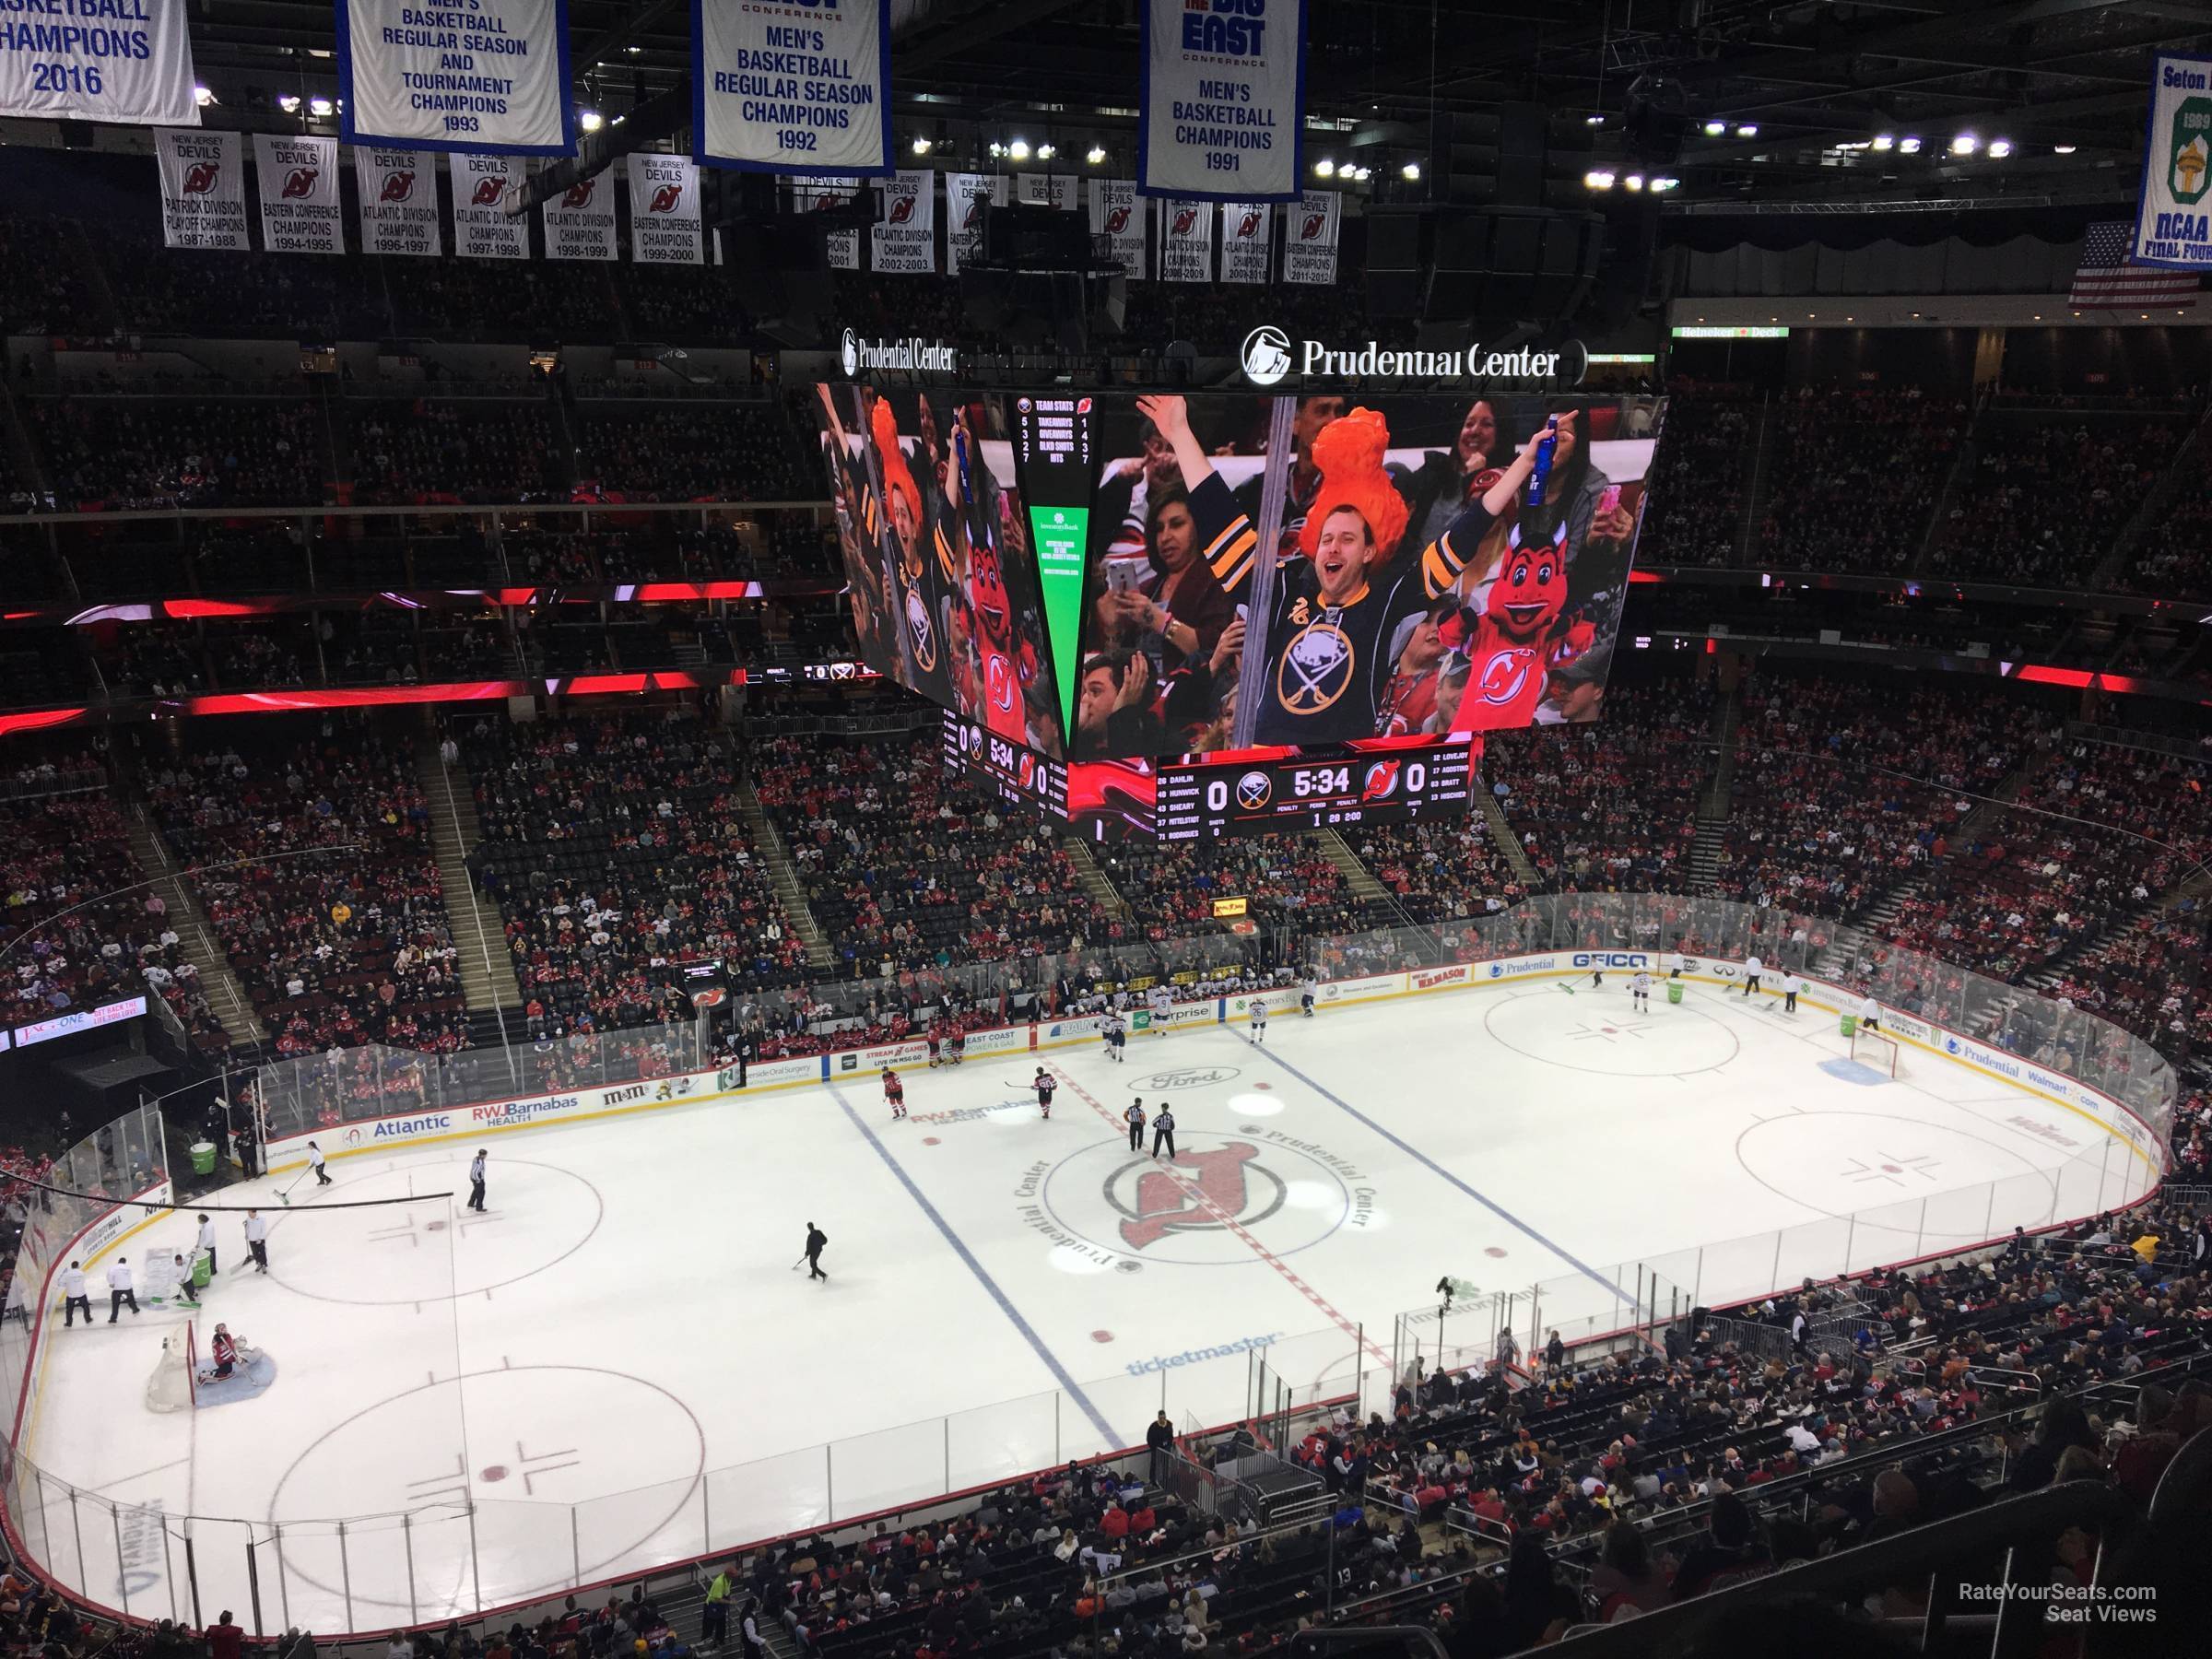 Section 126 at Prudential Center New Jersey Devils